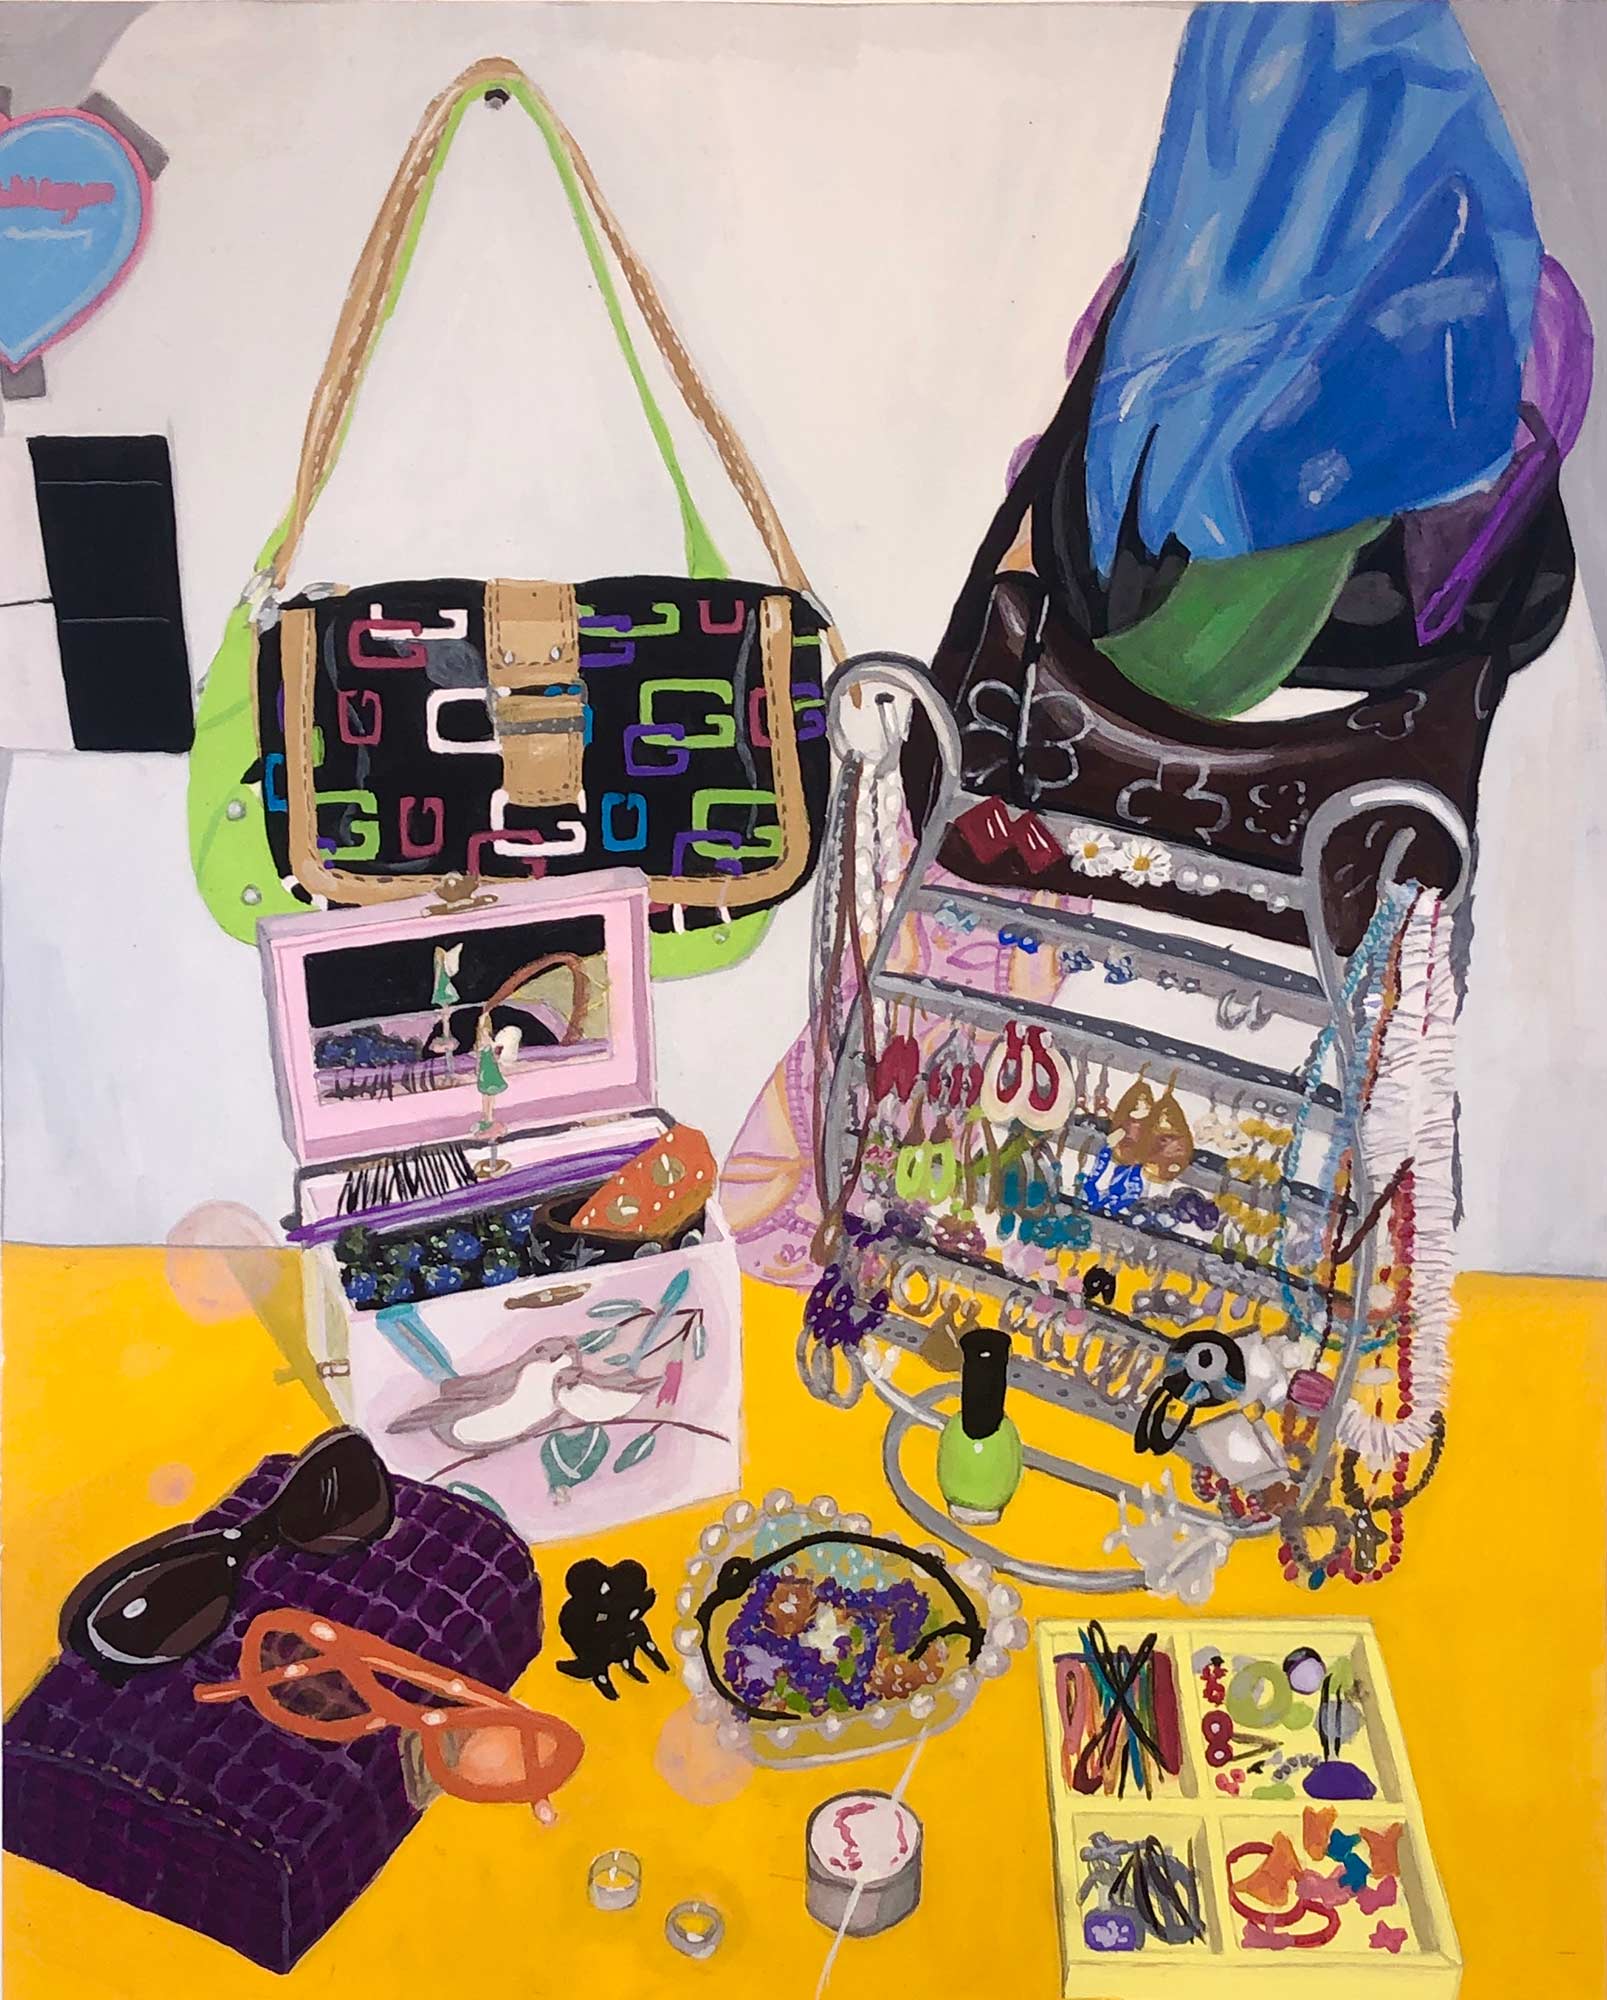 A painting of items and accessories in a bedroom